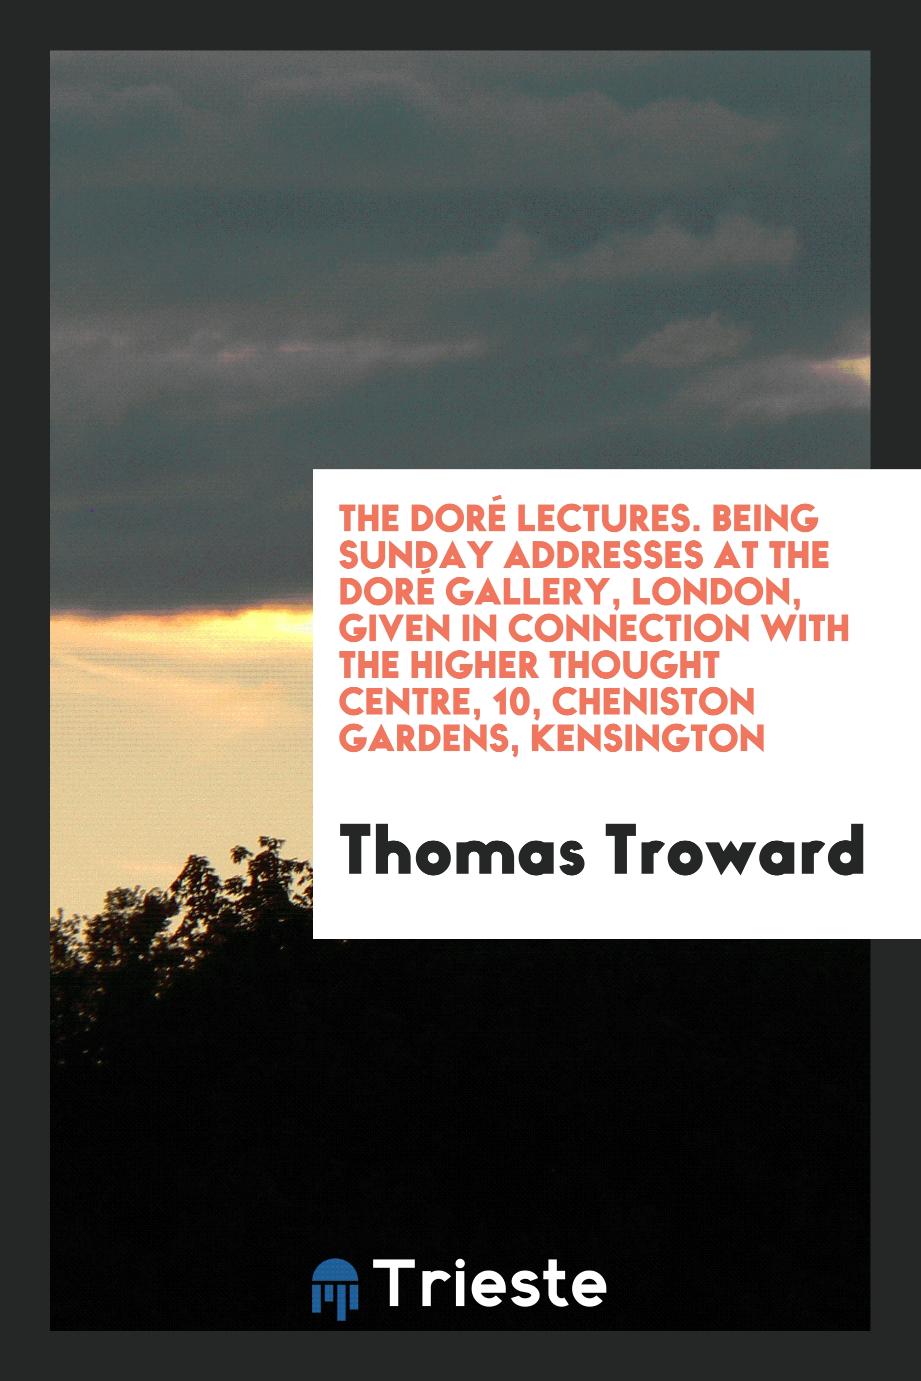 The Doré Lectures. Being Sunday Addresses at the Doré Gallery, London, Given in Connection with the Higher Thought Centre, 10, Cheniston Gardens, Kensington